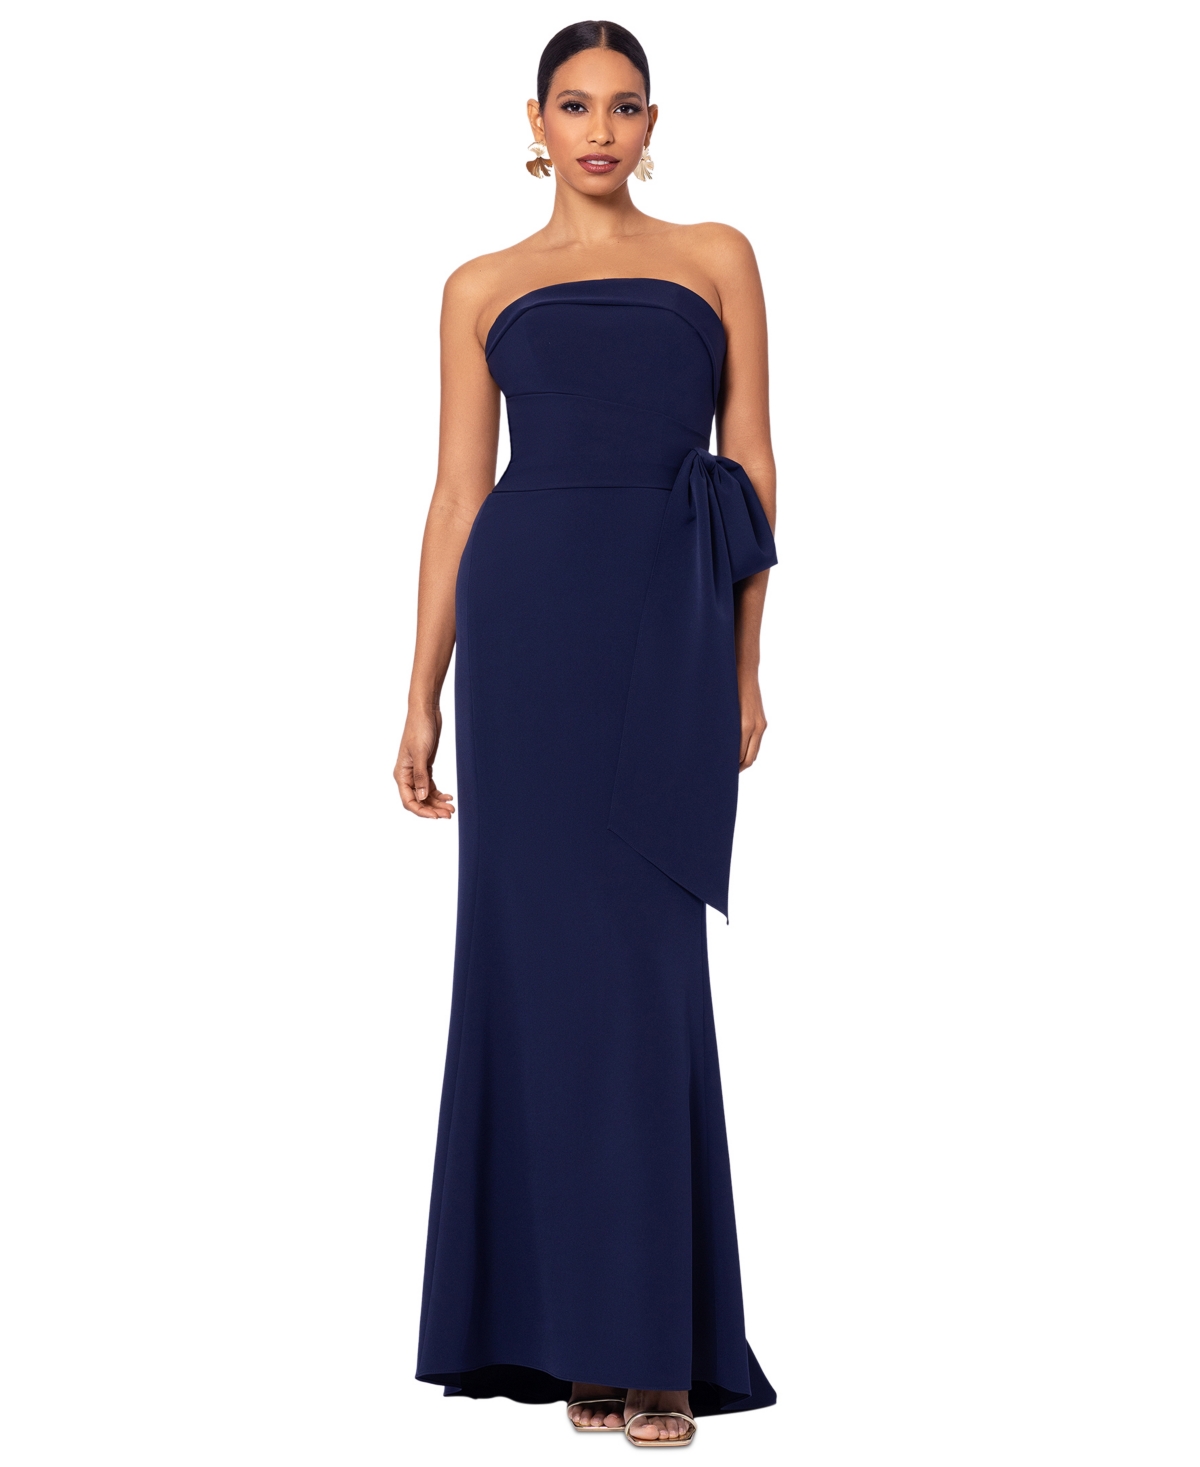 Women's Faux-Wrap Strapless Gown - Navy